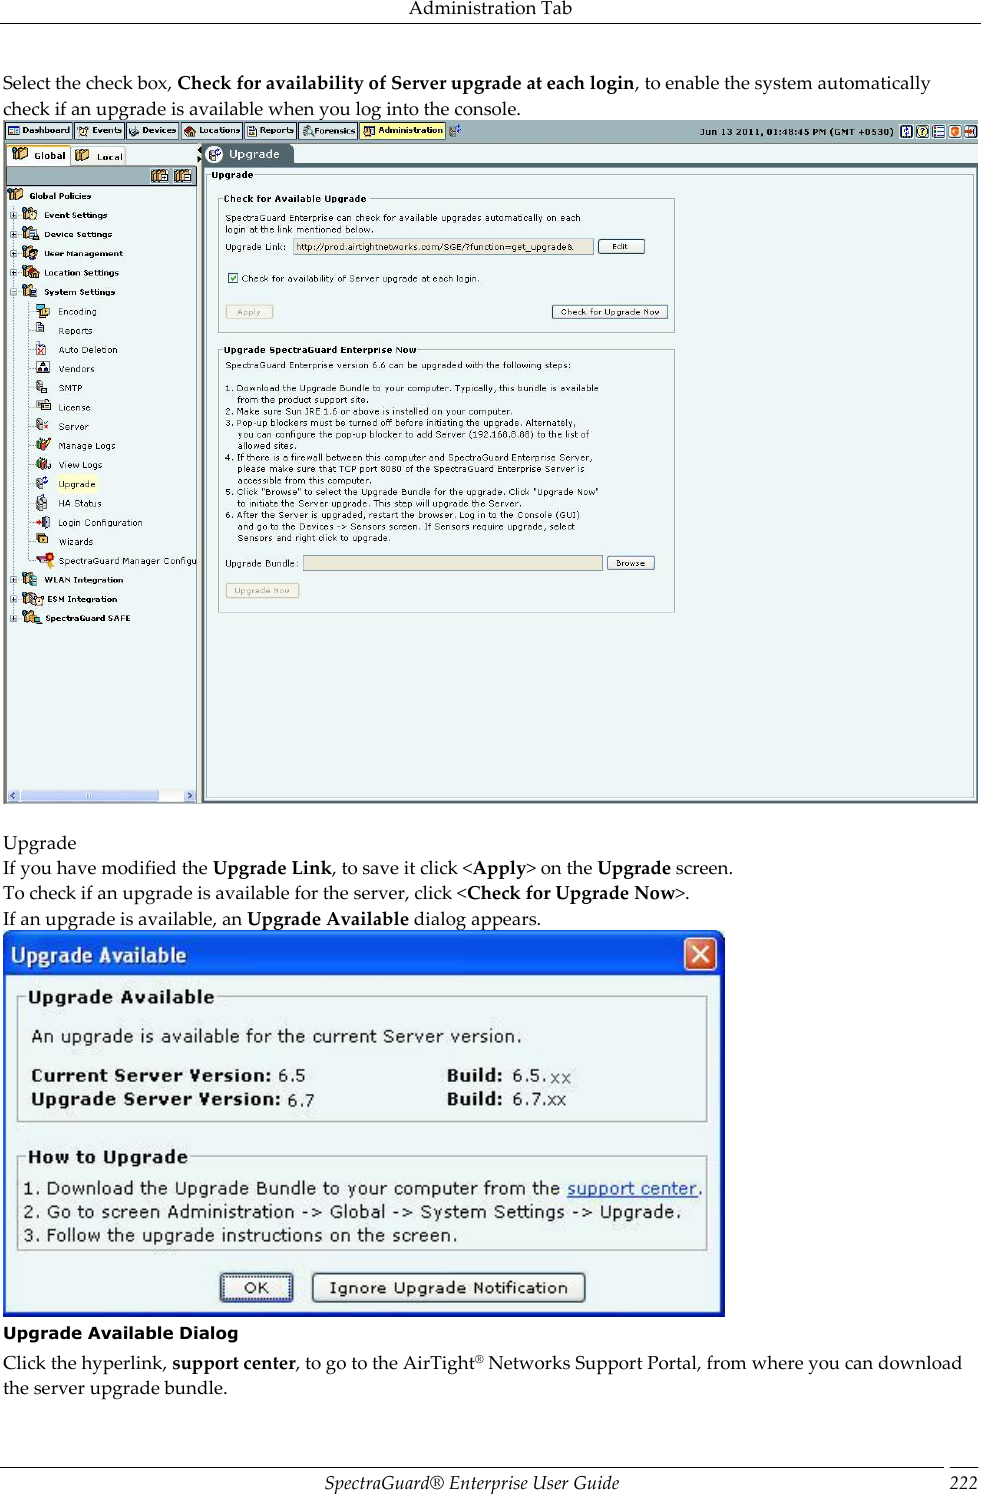 Administration Tab SpectraGuard®  Enterprise User Guide 222 Select the check box, Check for availability of Server upgrade at each login, to enable the system automatically check if an upgrade is available when you log into the console.    Upgrade If you have modified the Upgrade Link, to save it click &lt;Apply&gt; on the Upgrade screen. To check if an upgrade is available for the server, click &lt;Check for Upgrade Now&gt;. If an upgrade is available, an Upgrade Available dialog appears.  Upgrade Available Dialog Click the hyperlink, support center, to go to the AirTight® Networks Support Portal, from where you can download the server upgrade bundle. 